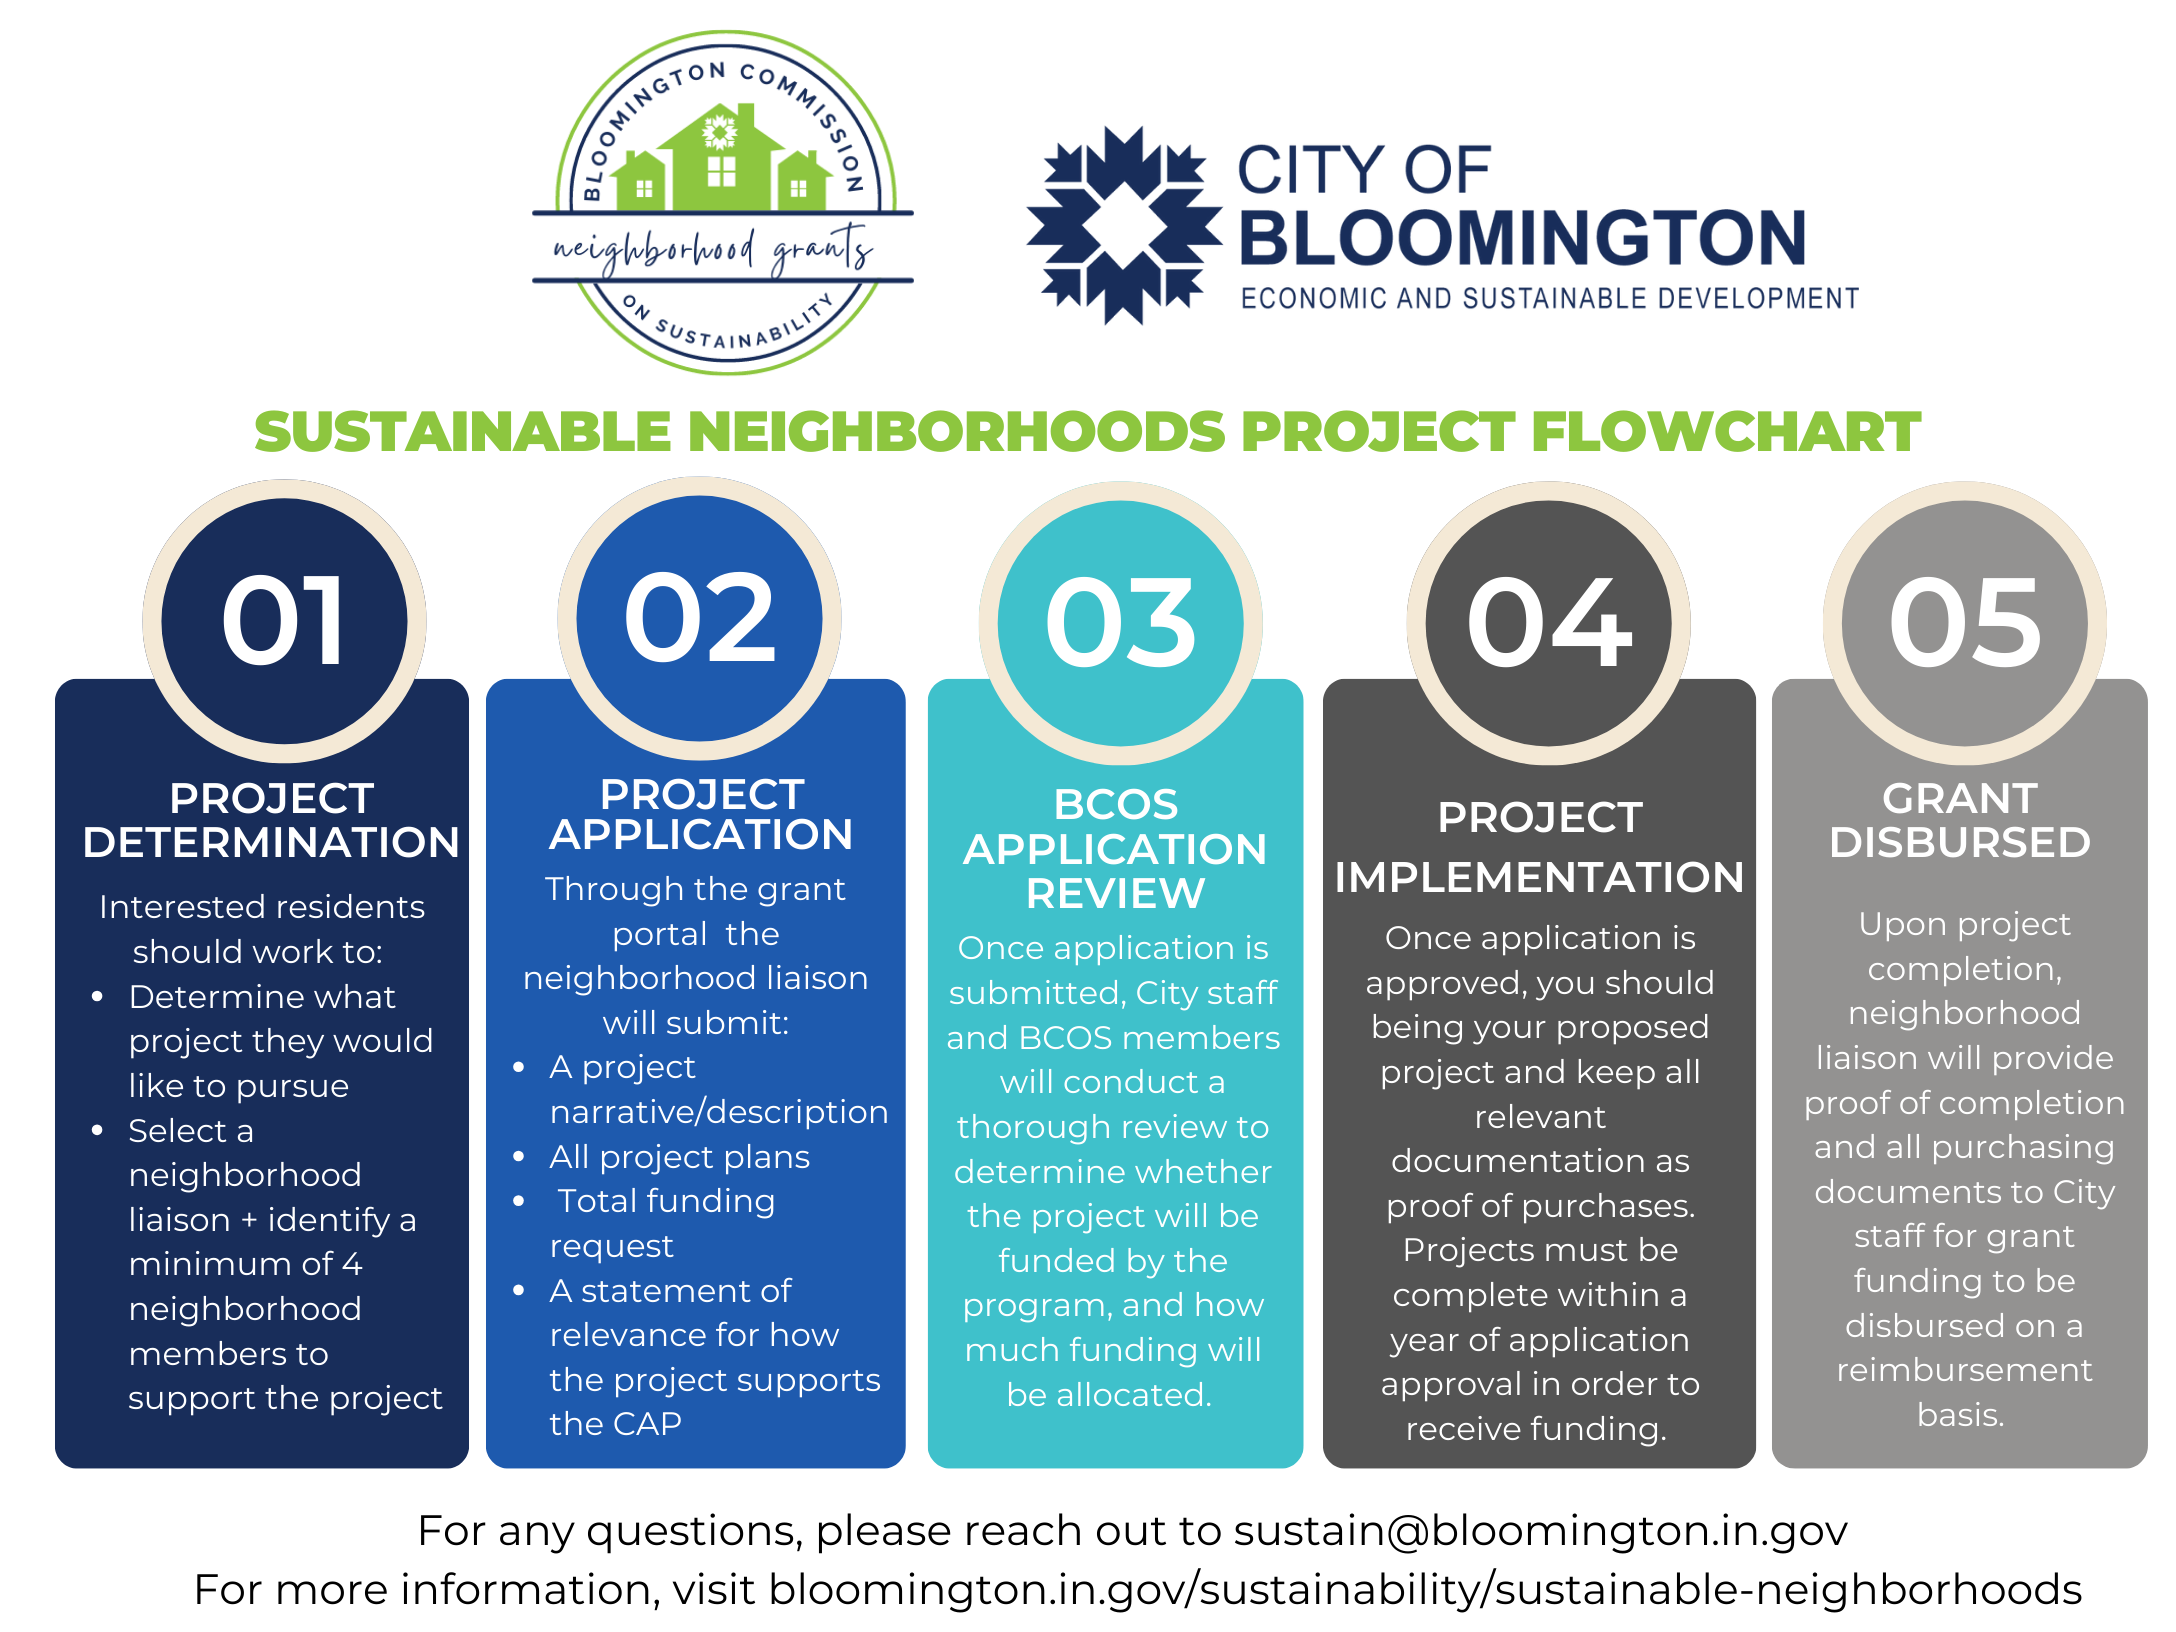 A flowchart showing how to obtain the sustainable neighborhoods grant, beginning with (1) project determination (2) project application (3) BCOS application review (4) project implementation, and ending with (5) grant disbursed